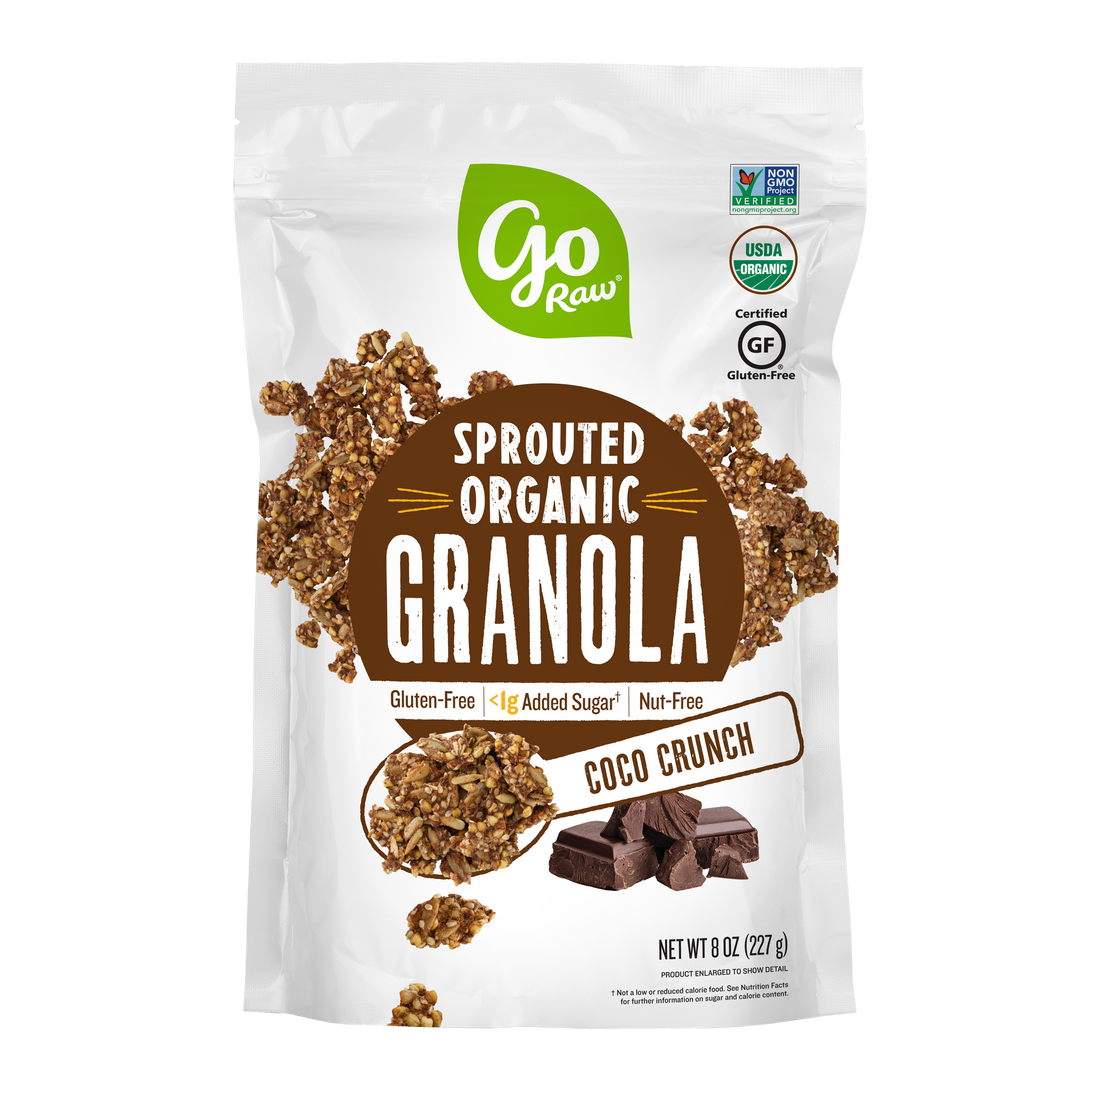 Coco Crunch Sprouted Granola - 6 Bags, 8oz Each